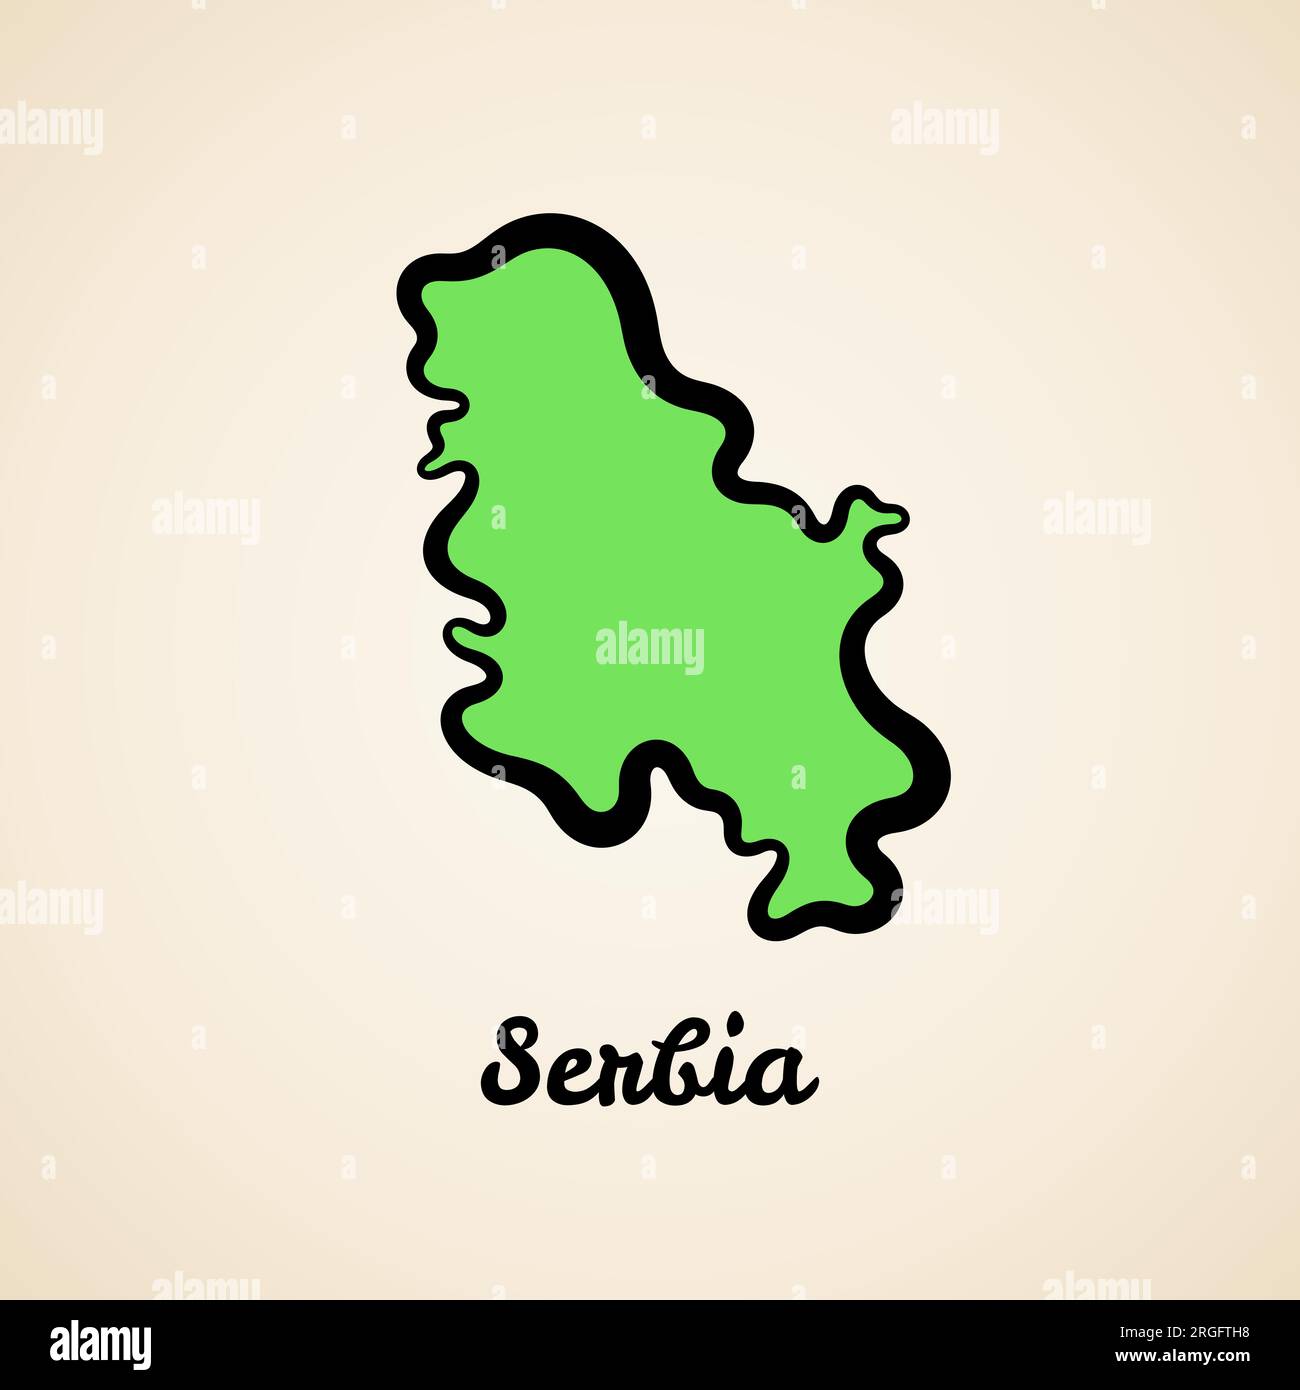 Green simplified map of Serbia with black outline. Stock Vector